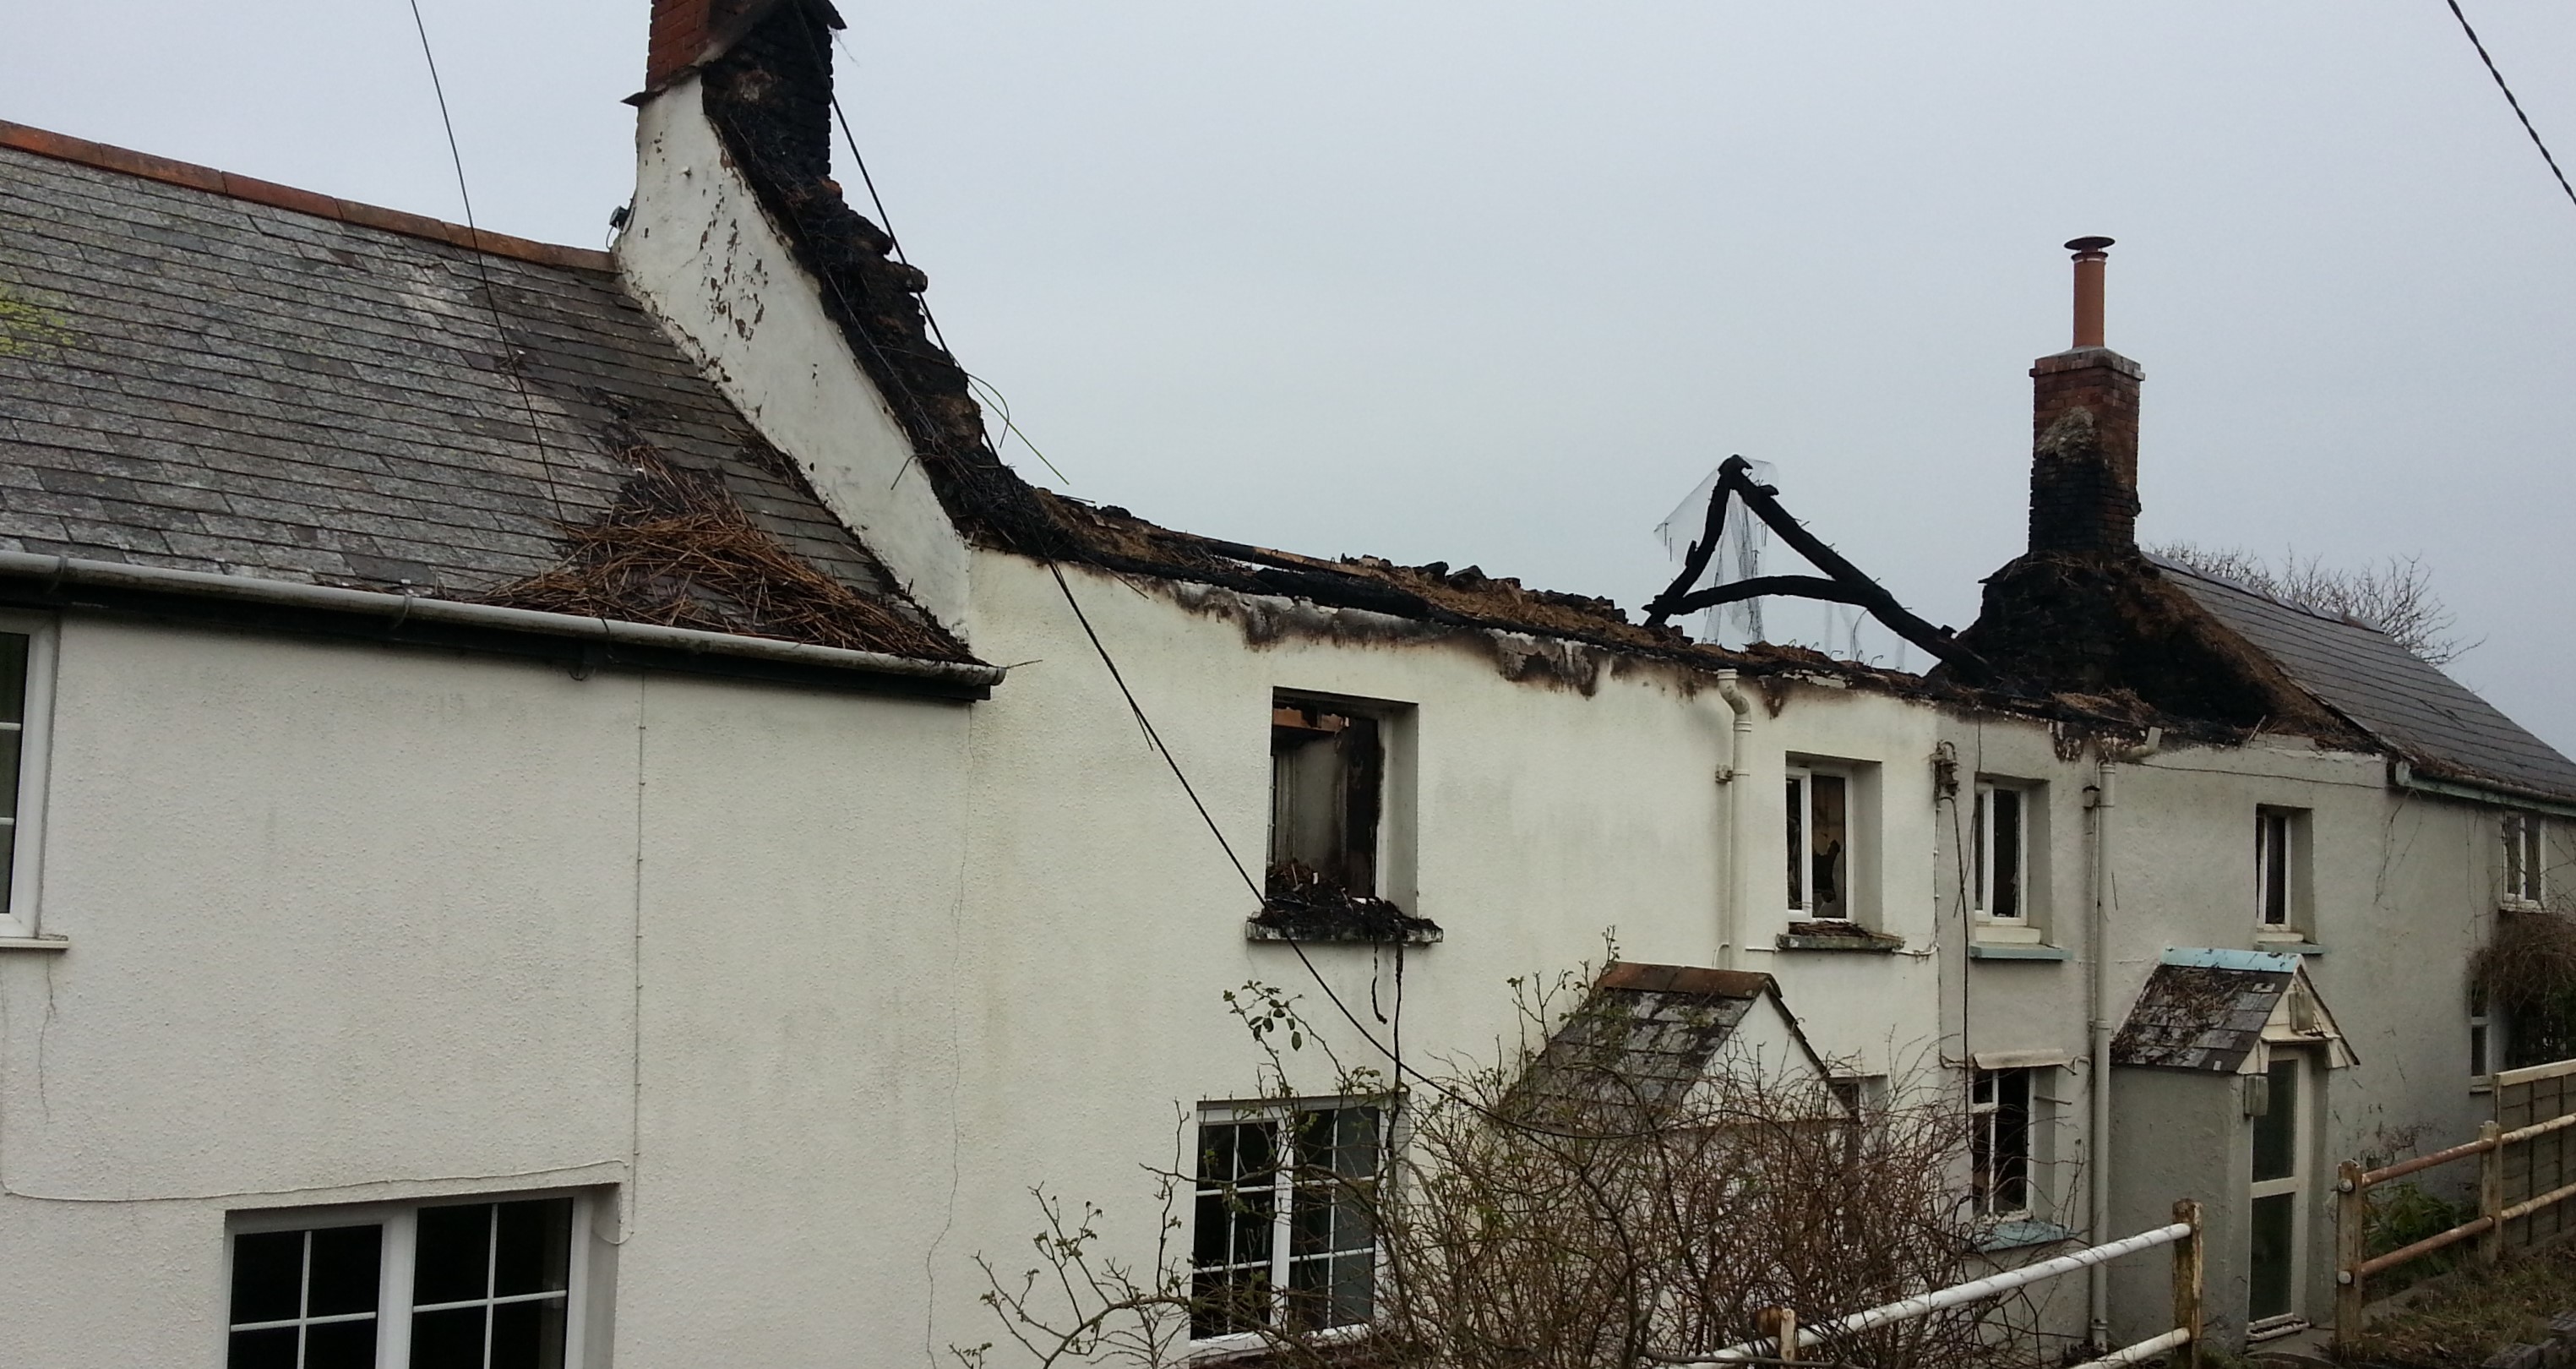 Devastating effects of fire damage on thatched property